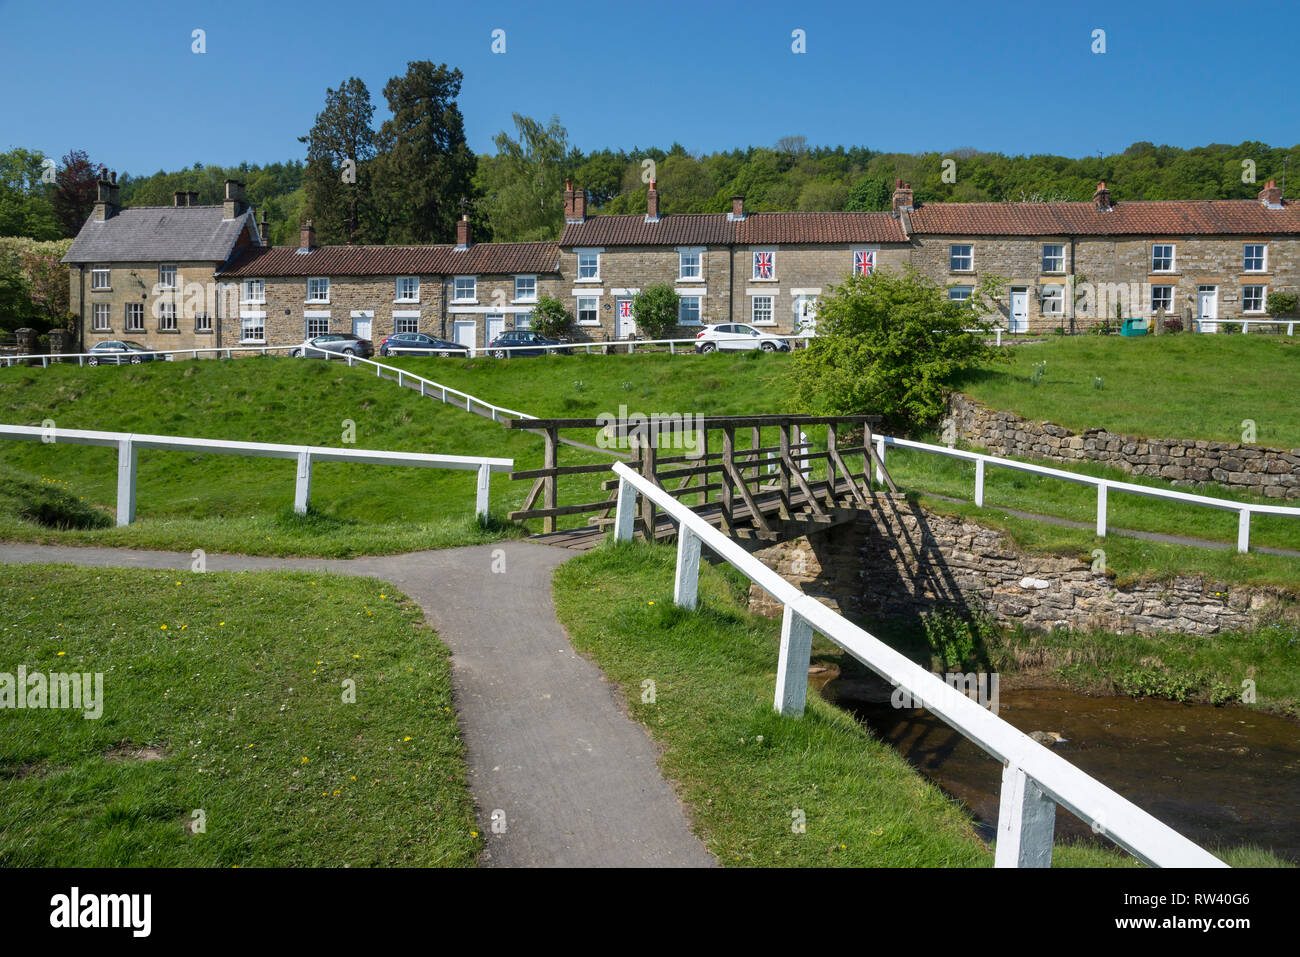 The beautiful village of Hutton-le-Hole in Ryedale, North Yorkshire, England. Stock Photo